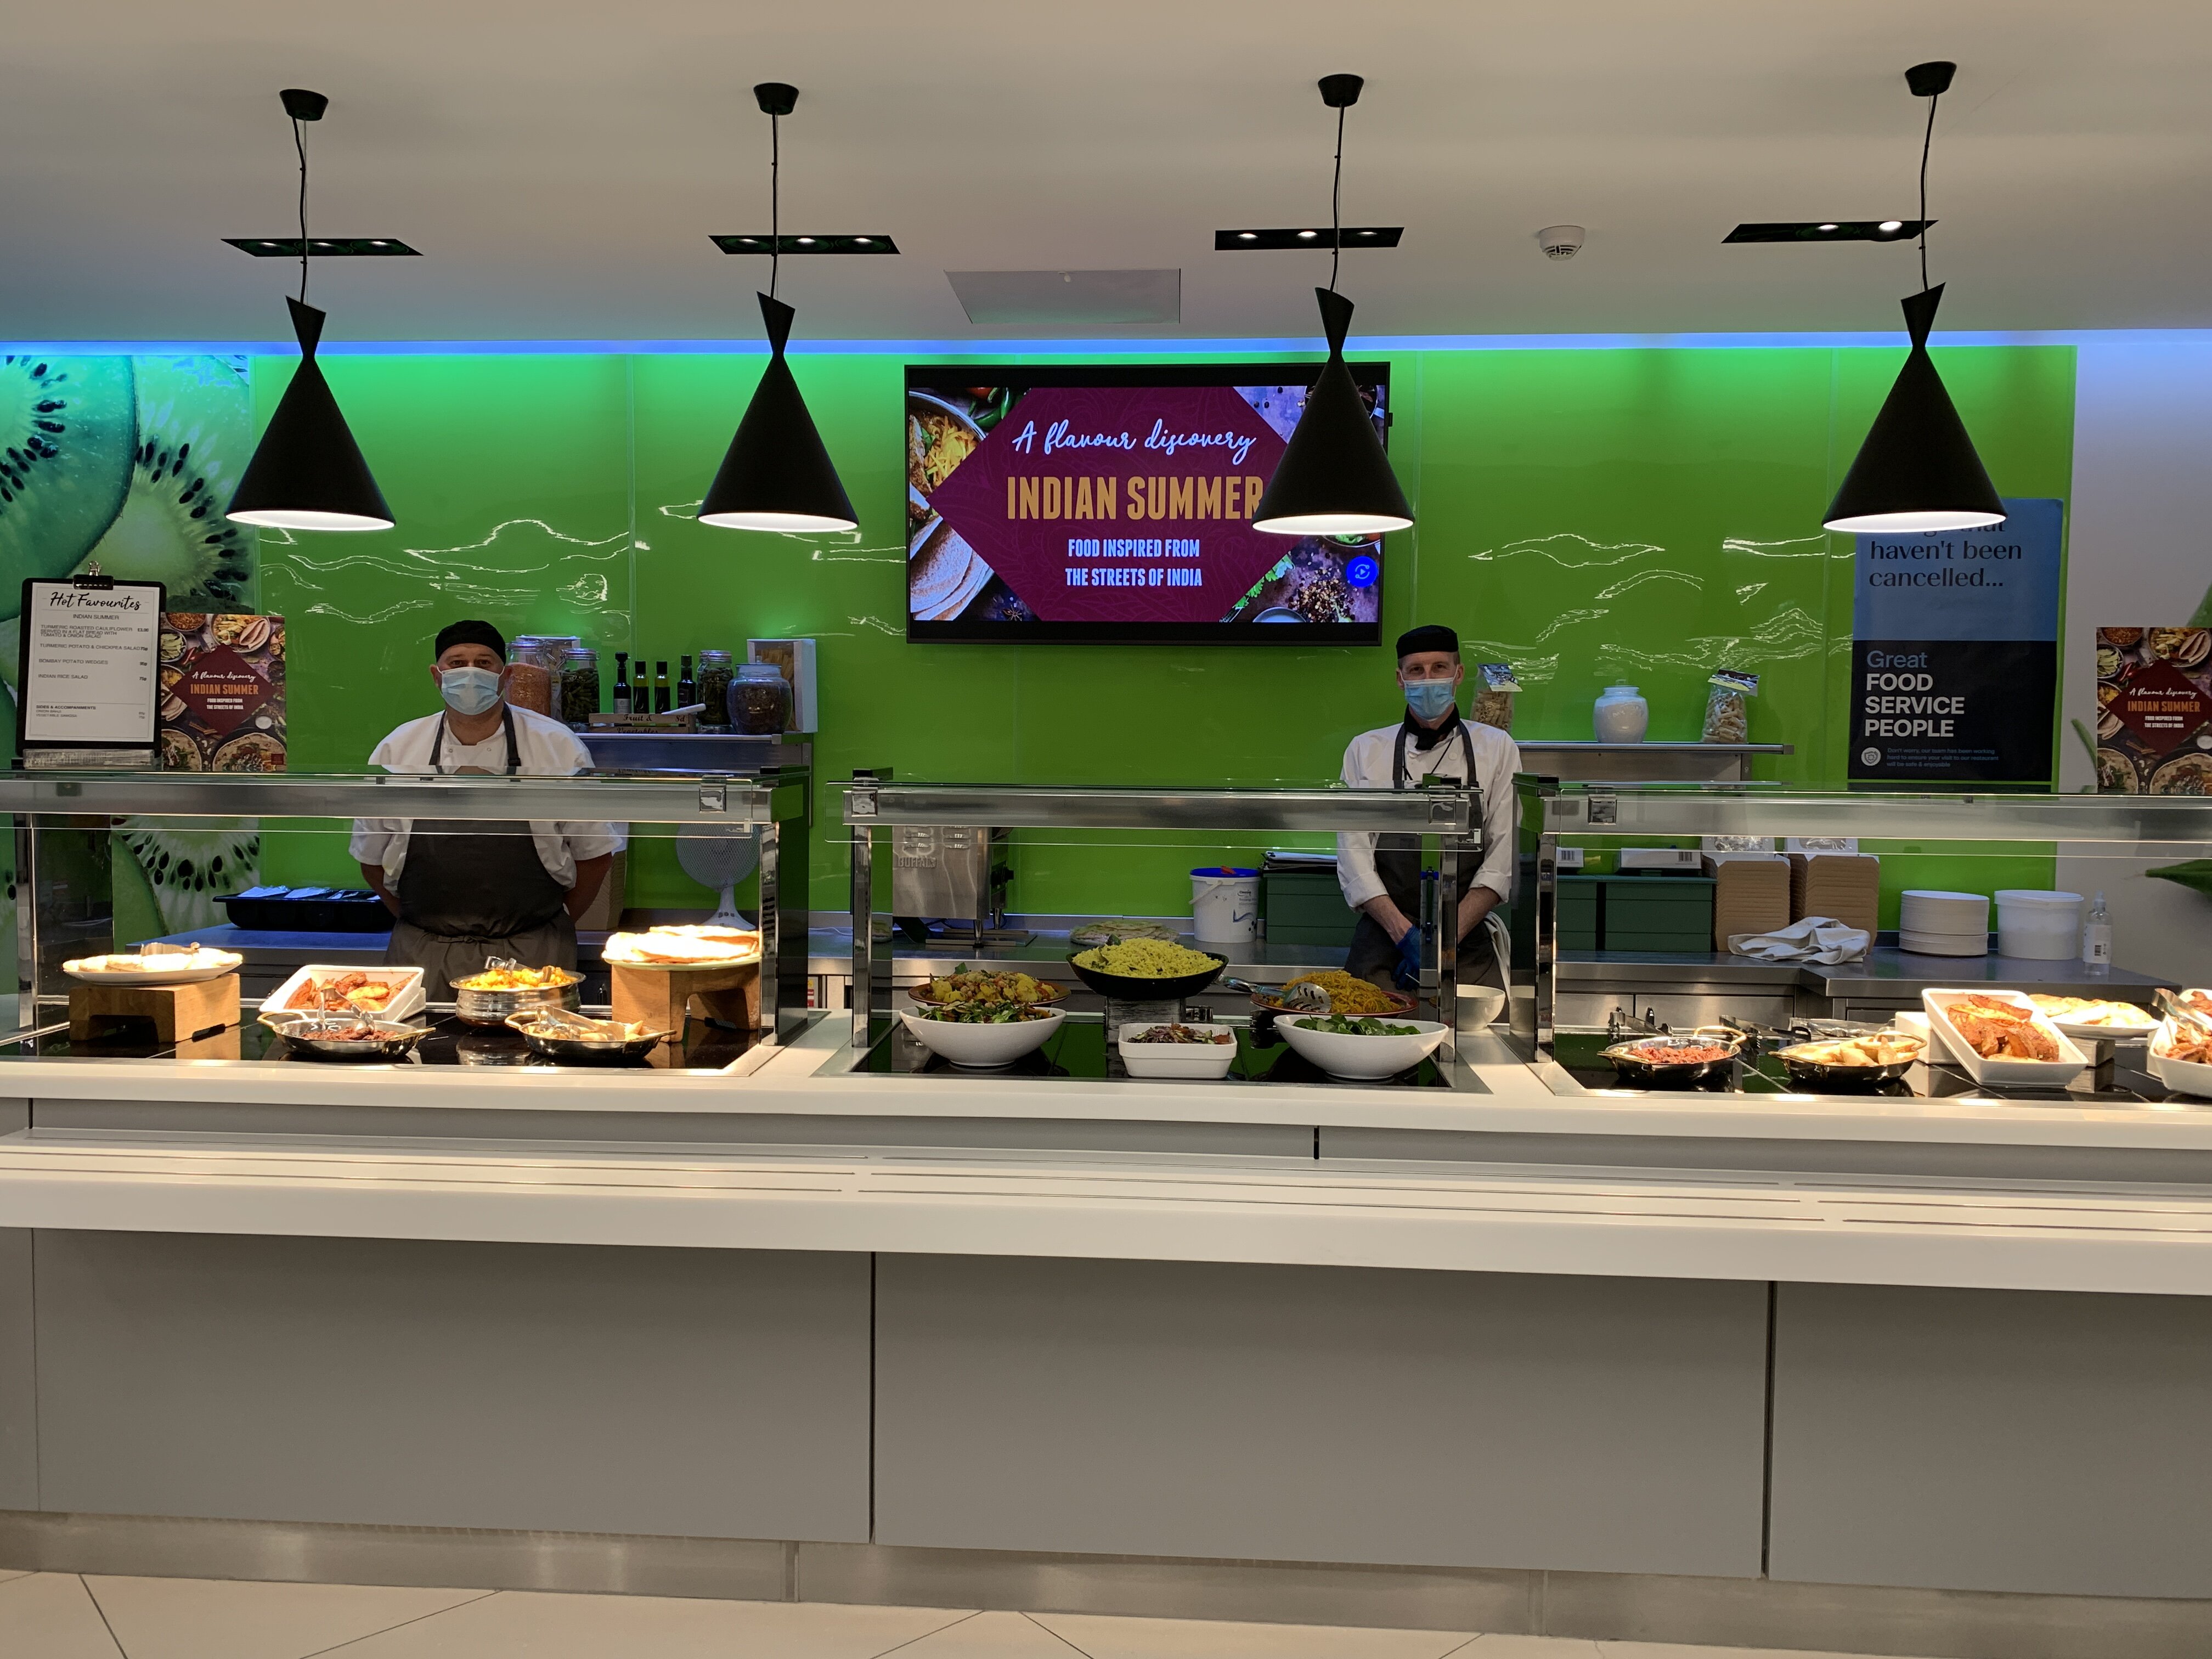 Ready to go: the future of workplace catering